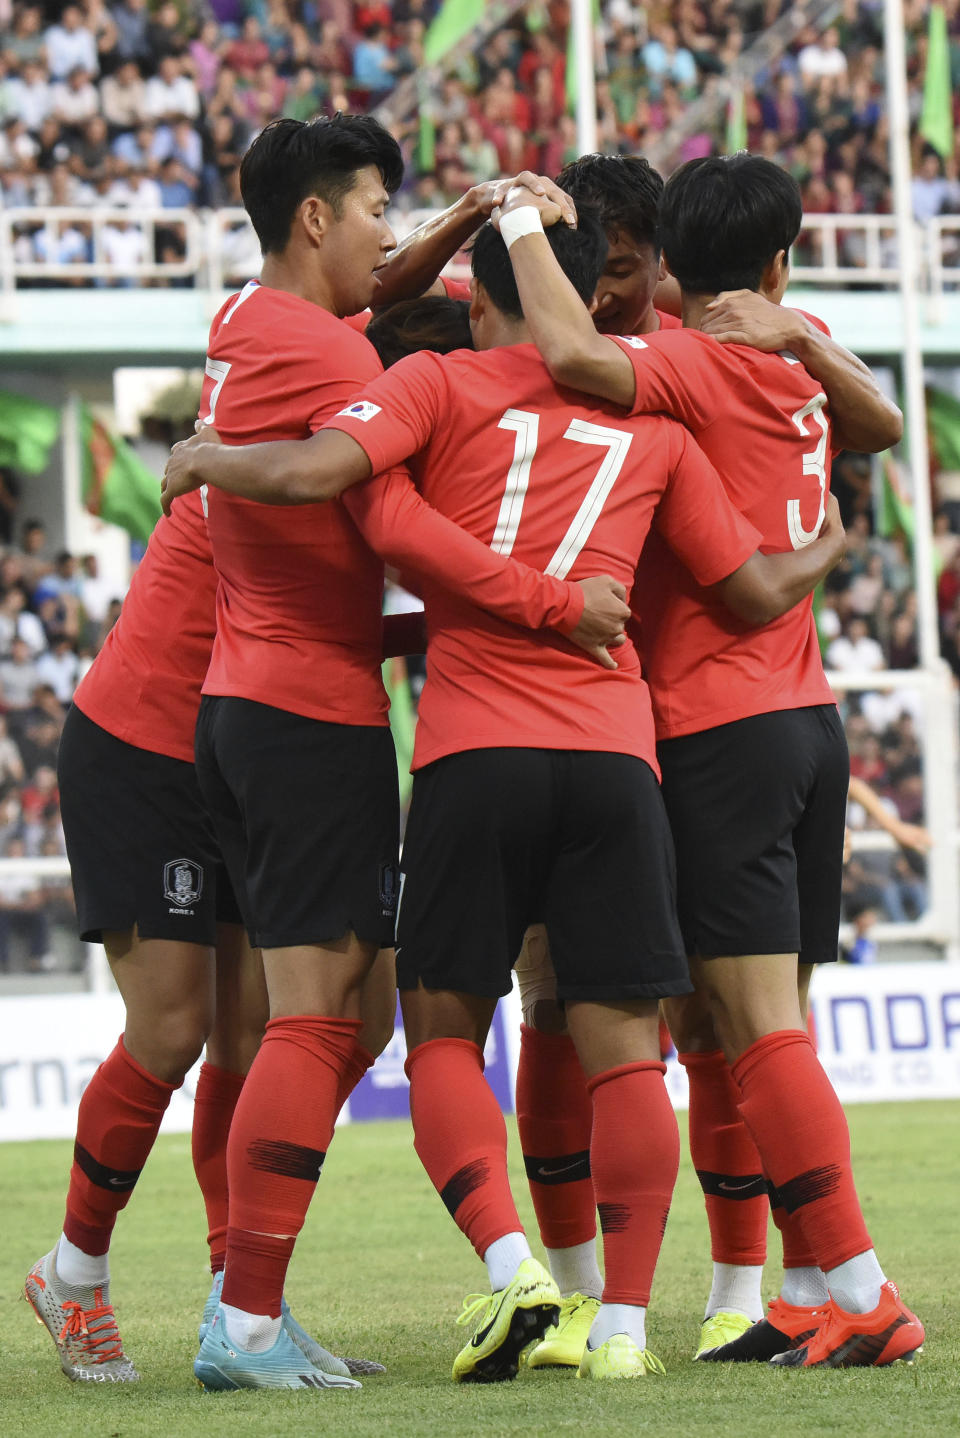 South Korea's team players celebrate after scoring a goal during the World Cup Group H qualifying soccer match between Turkmenistan and South Korea at the Kopetdag Stadium in Ashgabat, Turkmenistan, Tuesday, Sept. 10, 2019. (AP Photo/Alexander Vershinin)